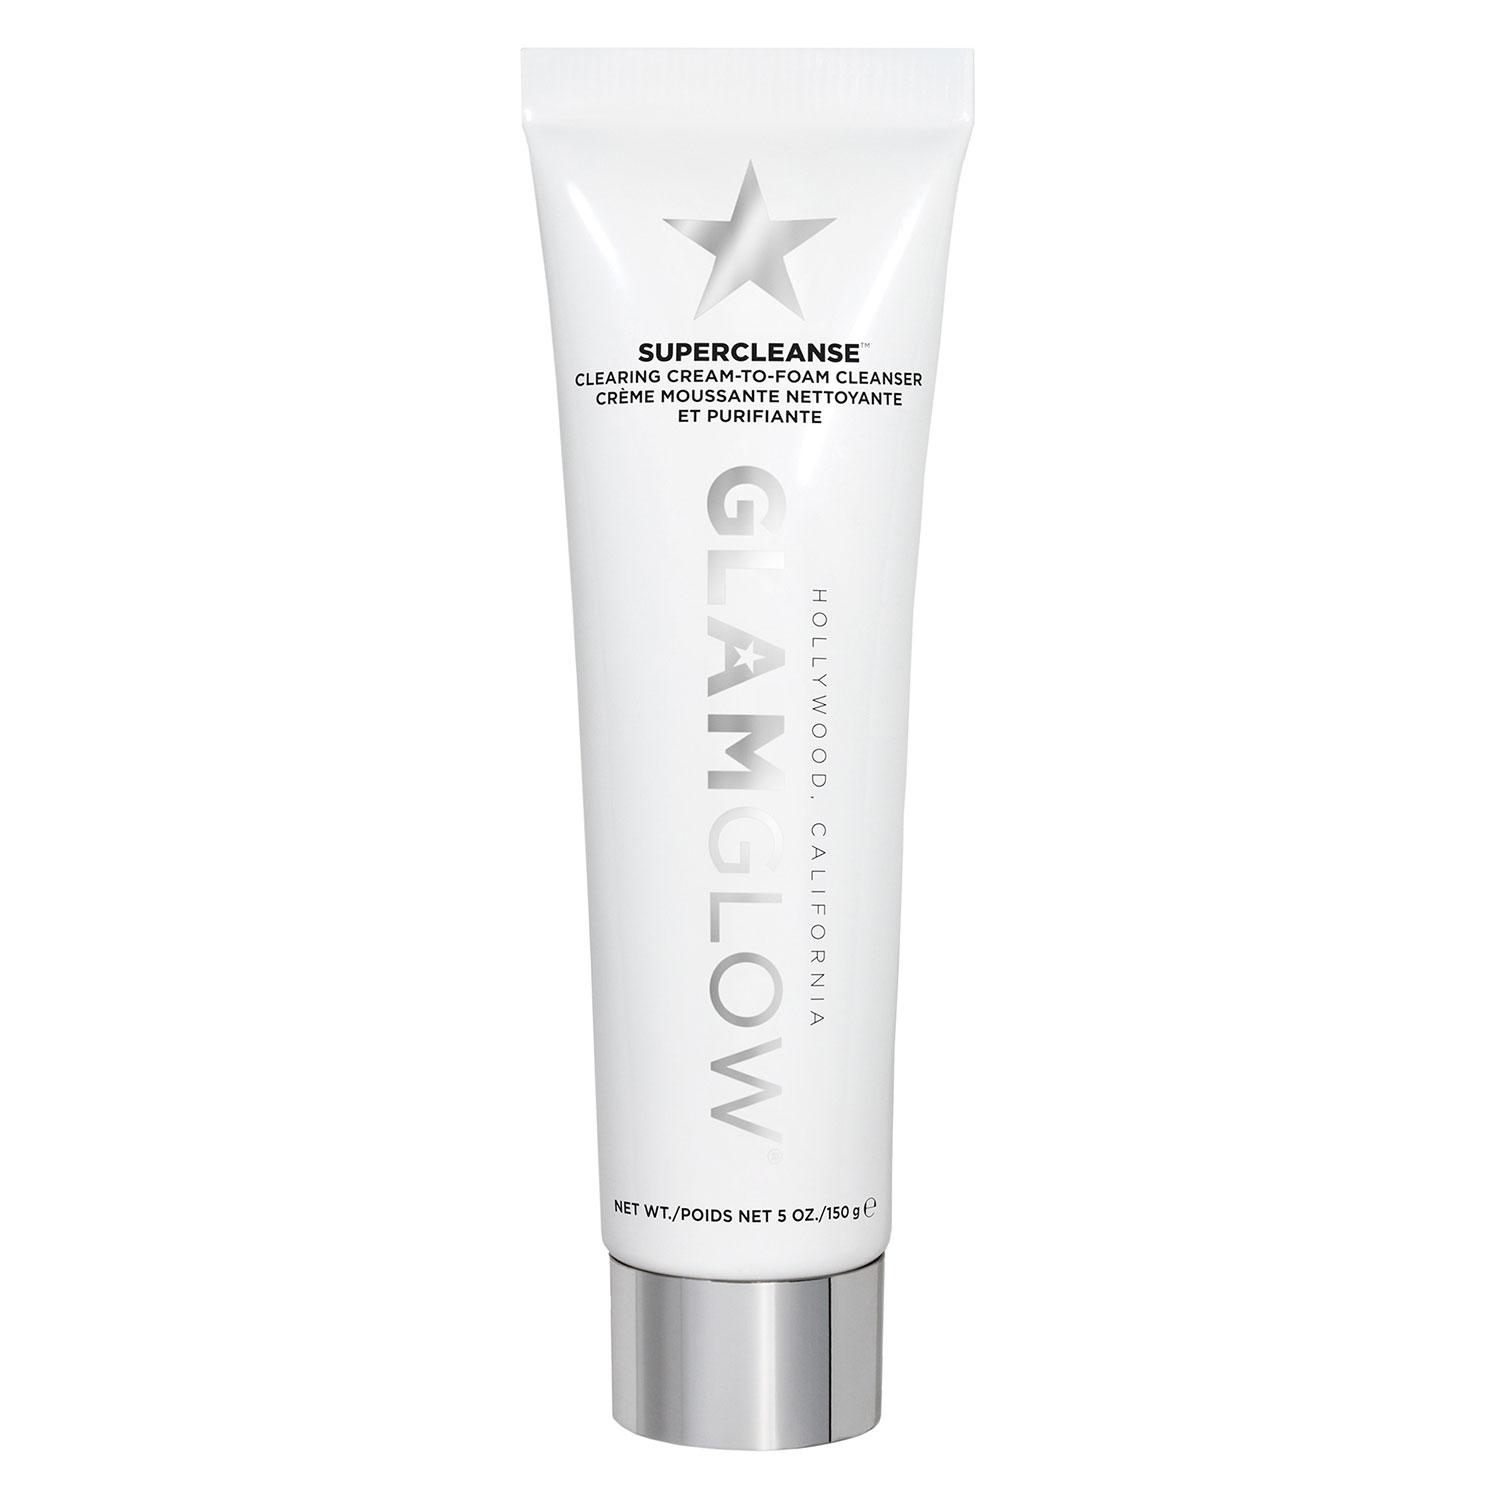 GlamGlow Skincare - SUPERCLEANSE Clearing Cream-to-Foam Cleanser